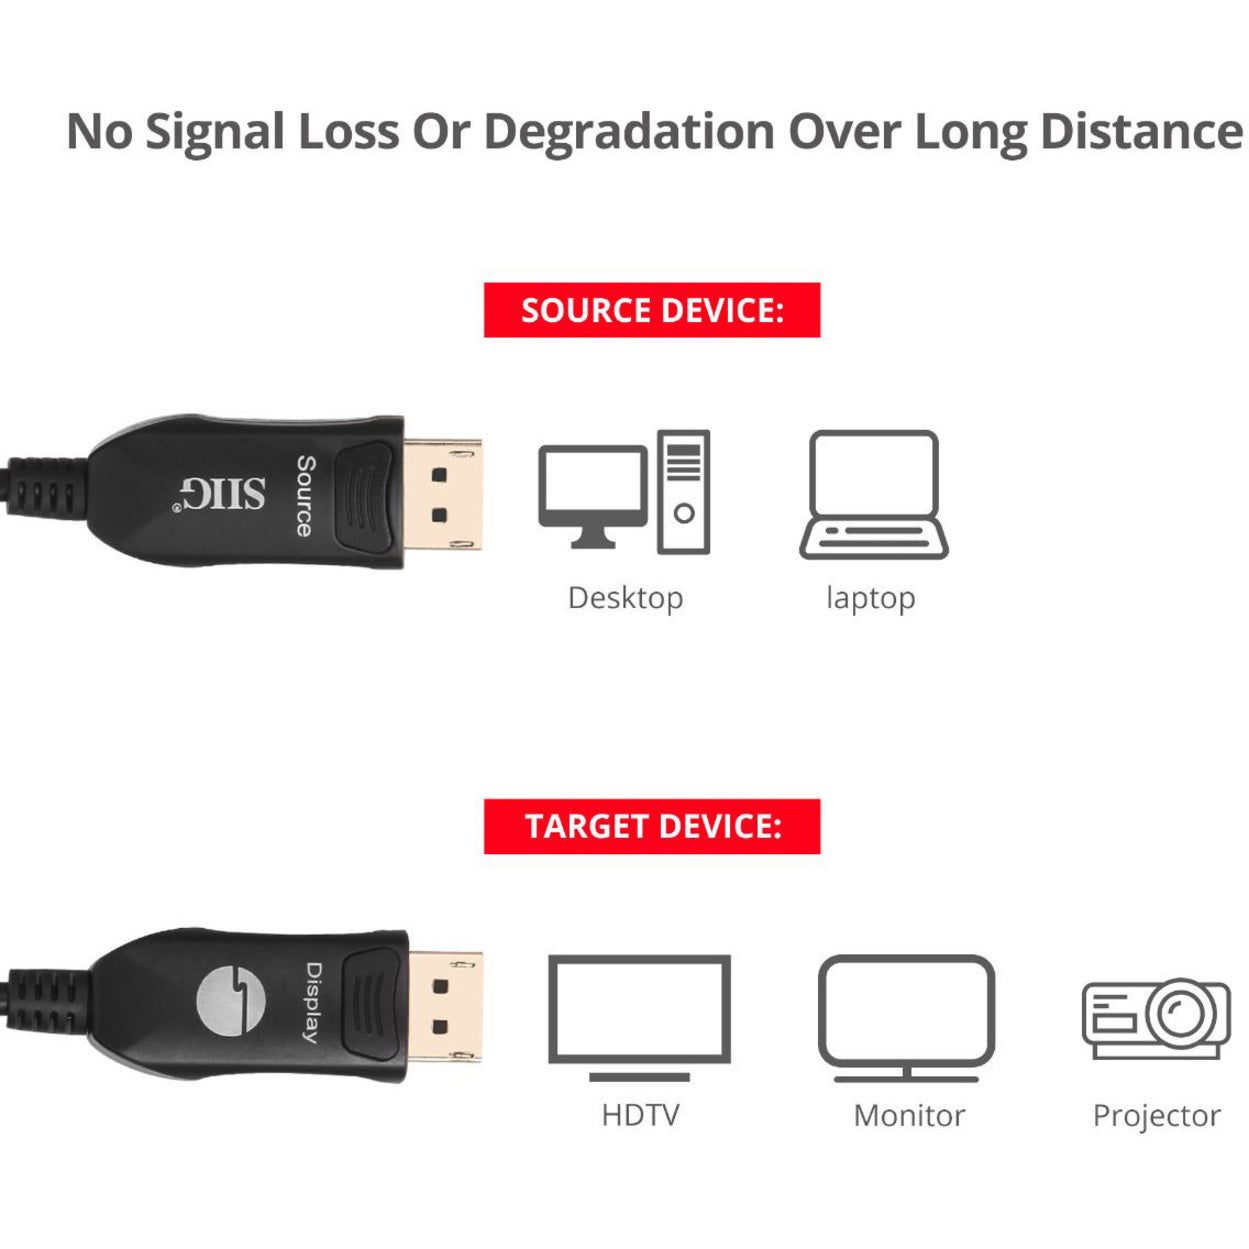 SIIG 4K DisplayPort 1.2 AOC Cable - 30M [Discontinued]